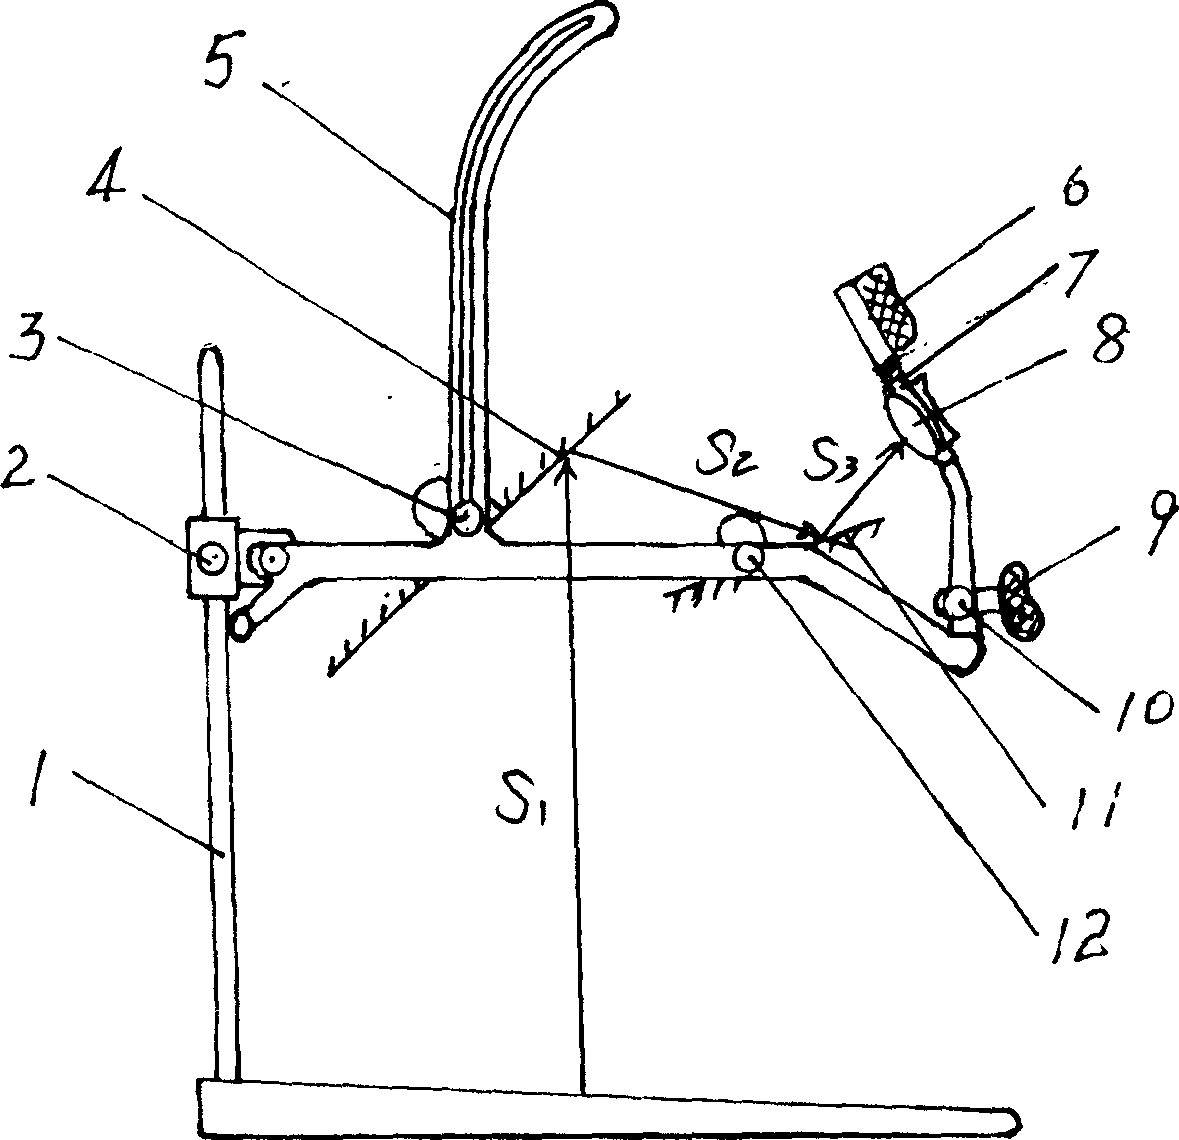 Anti-myopia apparatus for reading and writing